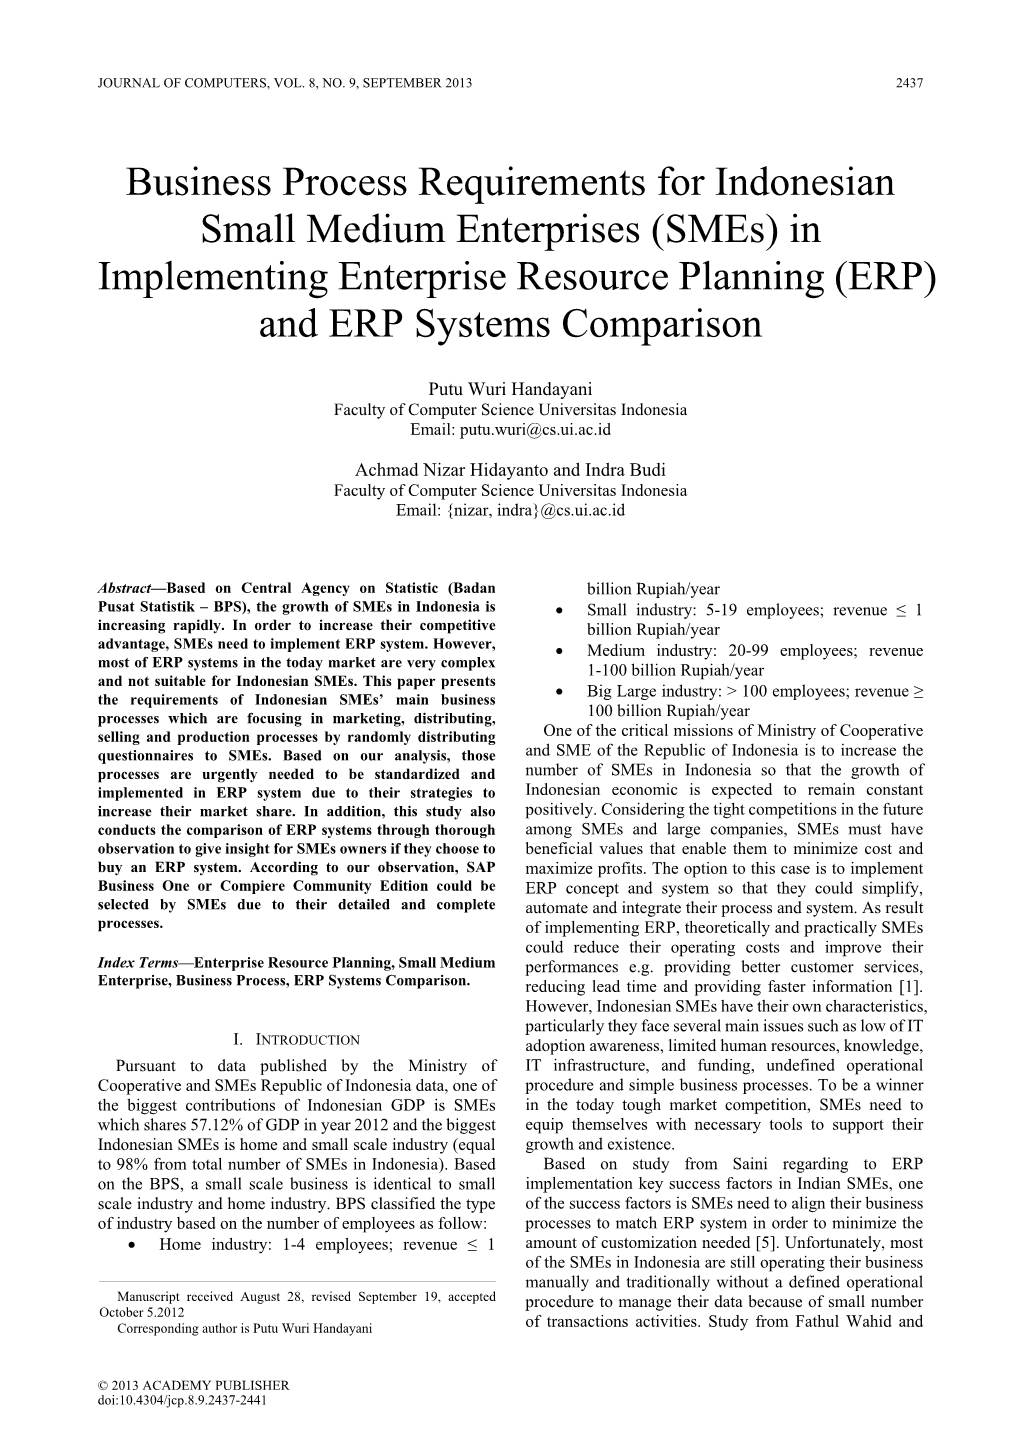 (Smes) in Implementing Enterprise Resource Planning (ERP) and ERP Systems Comparison